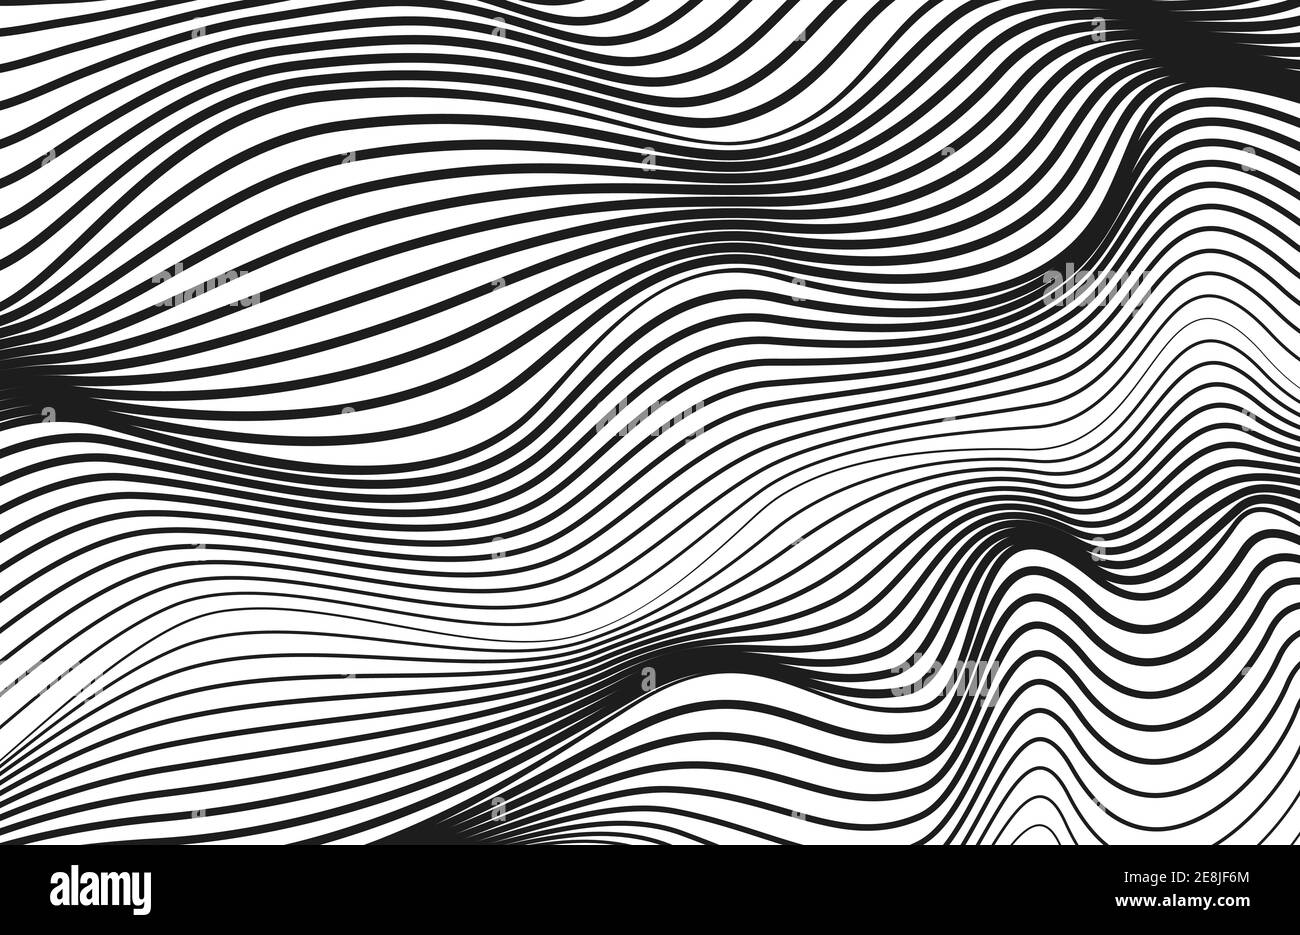 Black squiggly lines, white background. Abstract striped pattern. Vector modern op art design. Radio, sound waves concept. Technology curves. EPS10 Stock Vector